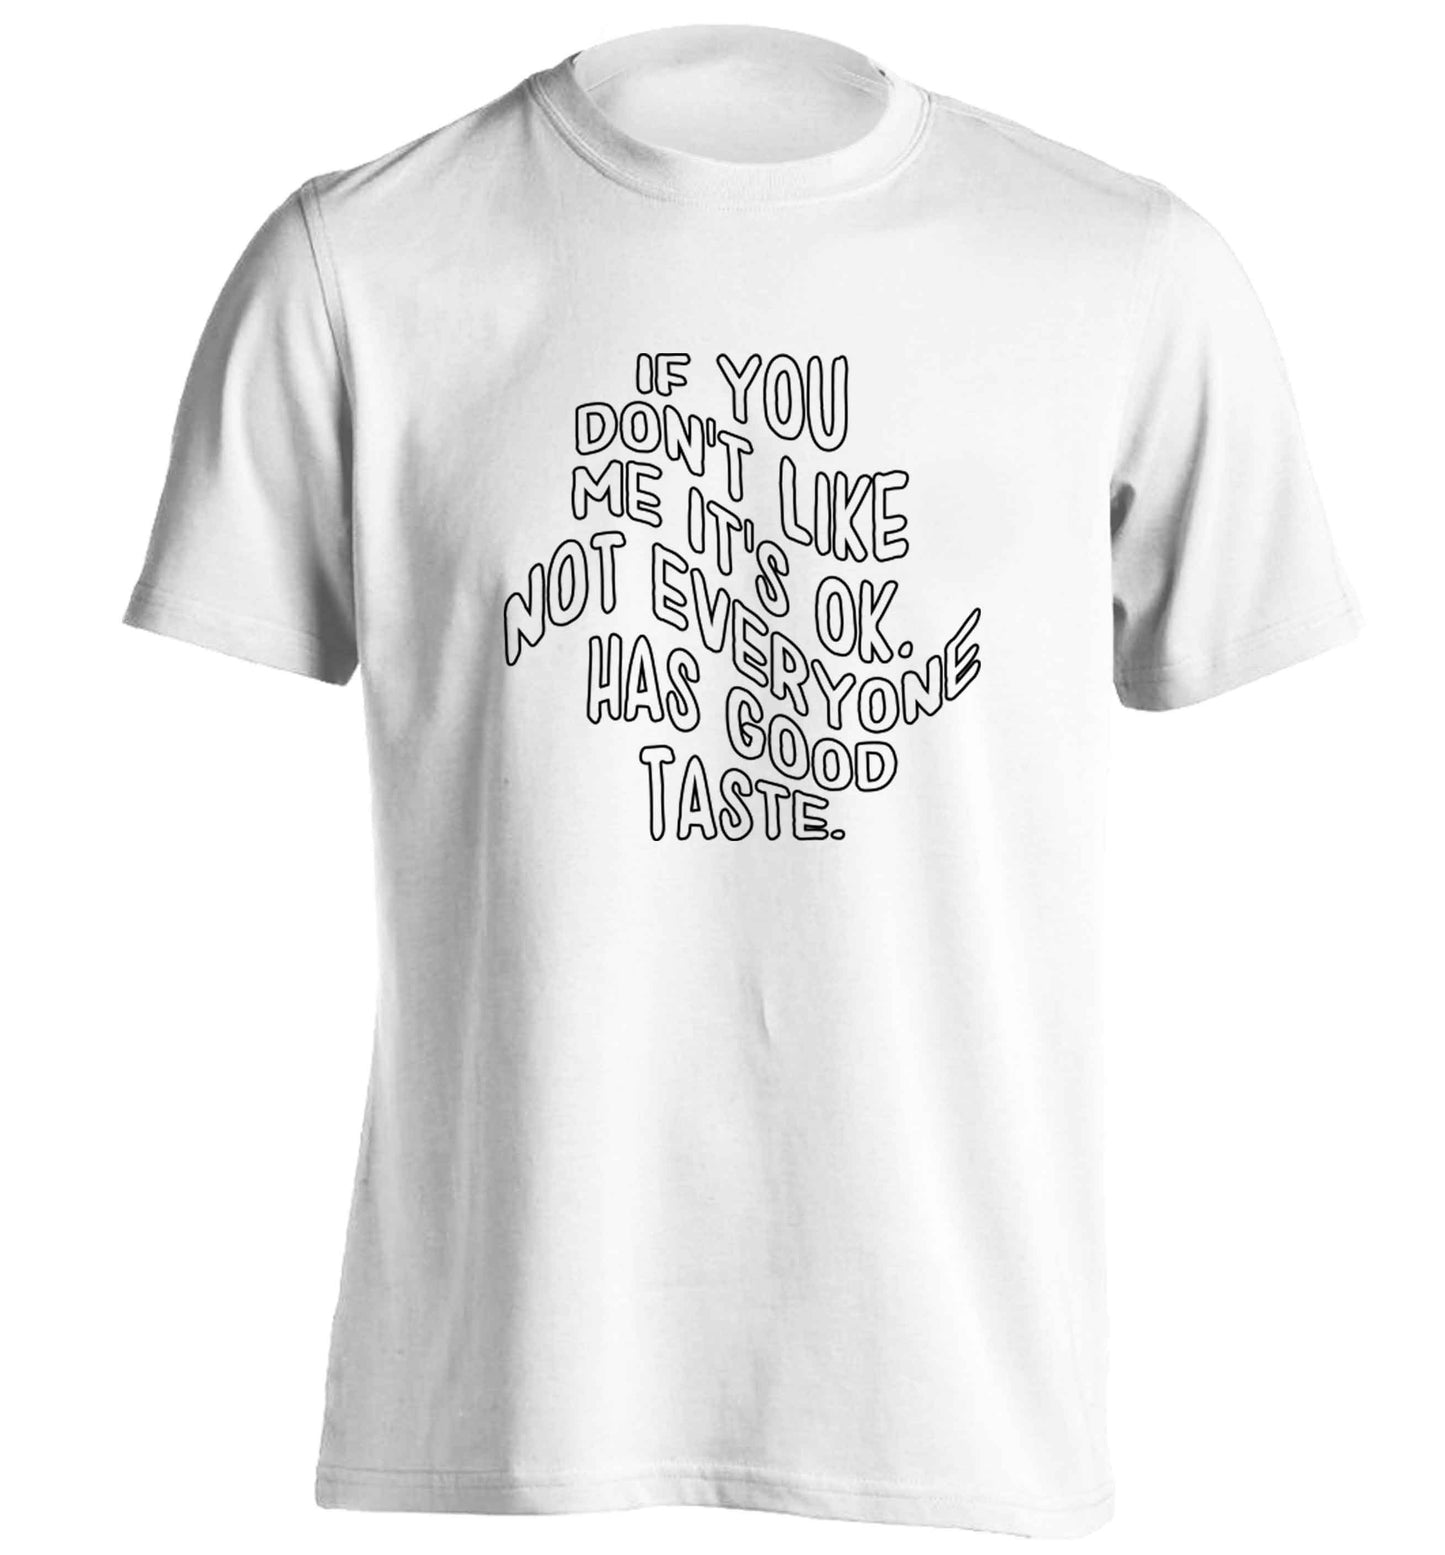 If you don't like me it's ok not everyone has good taste adults unisex white Tshirt 2XL